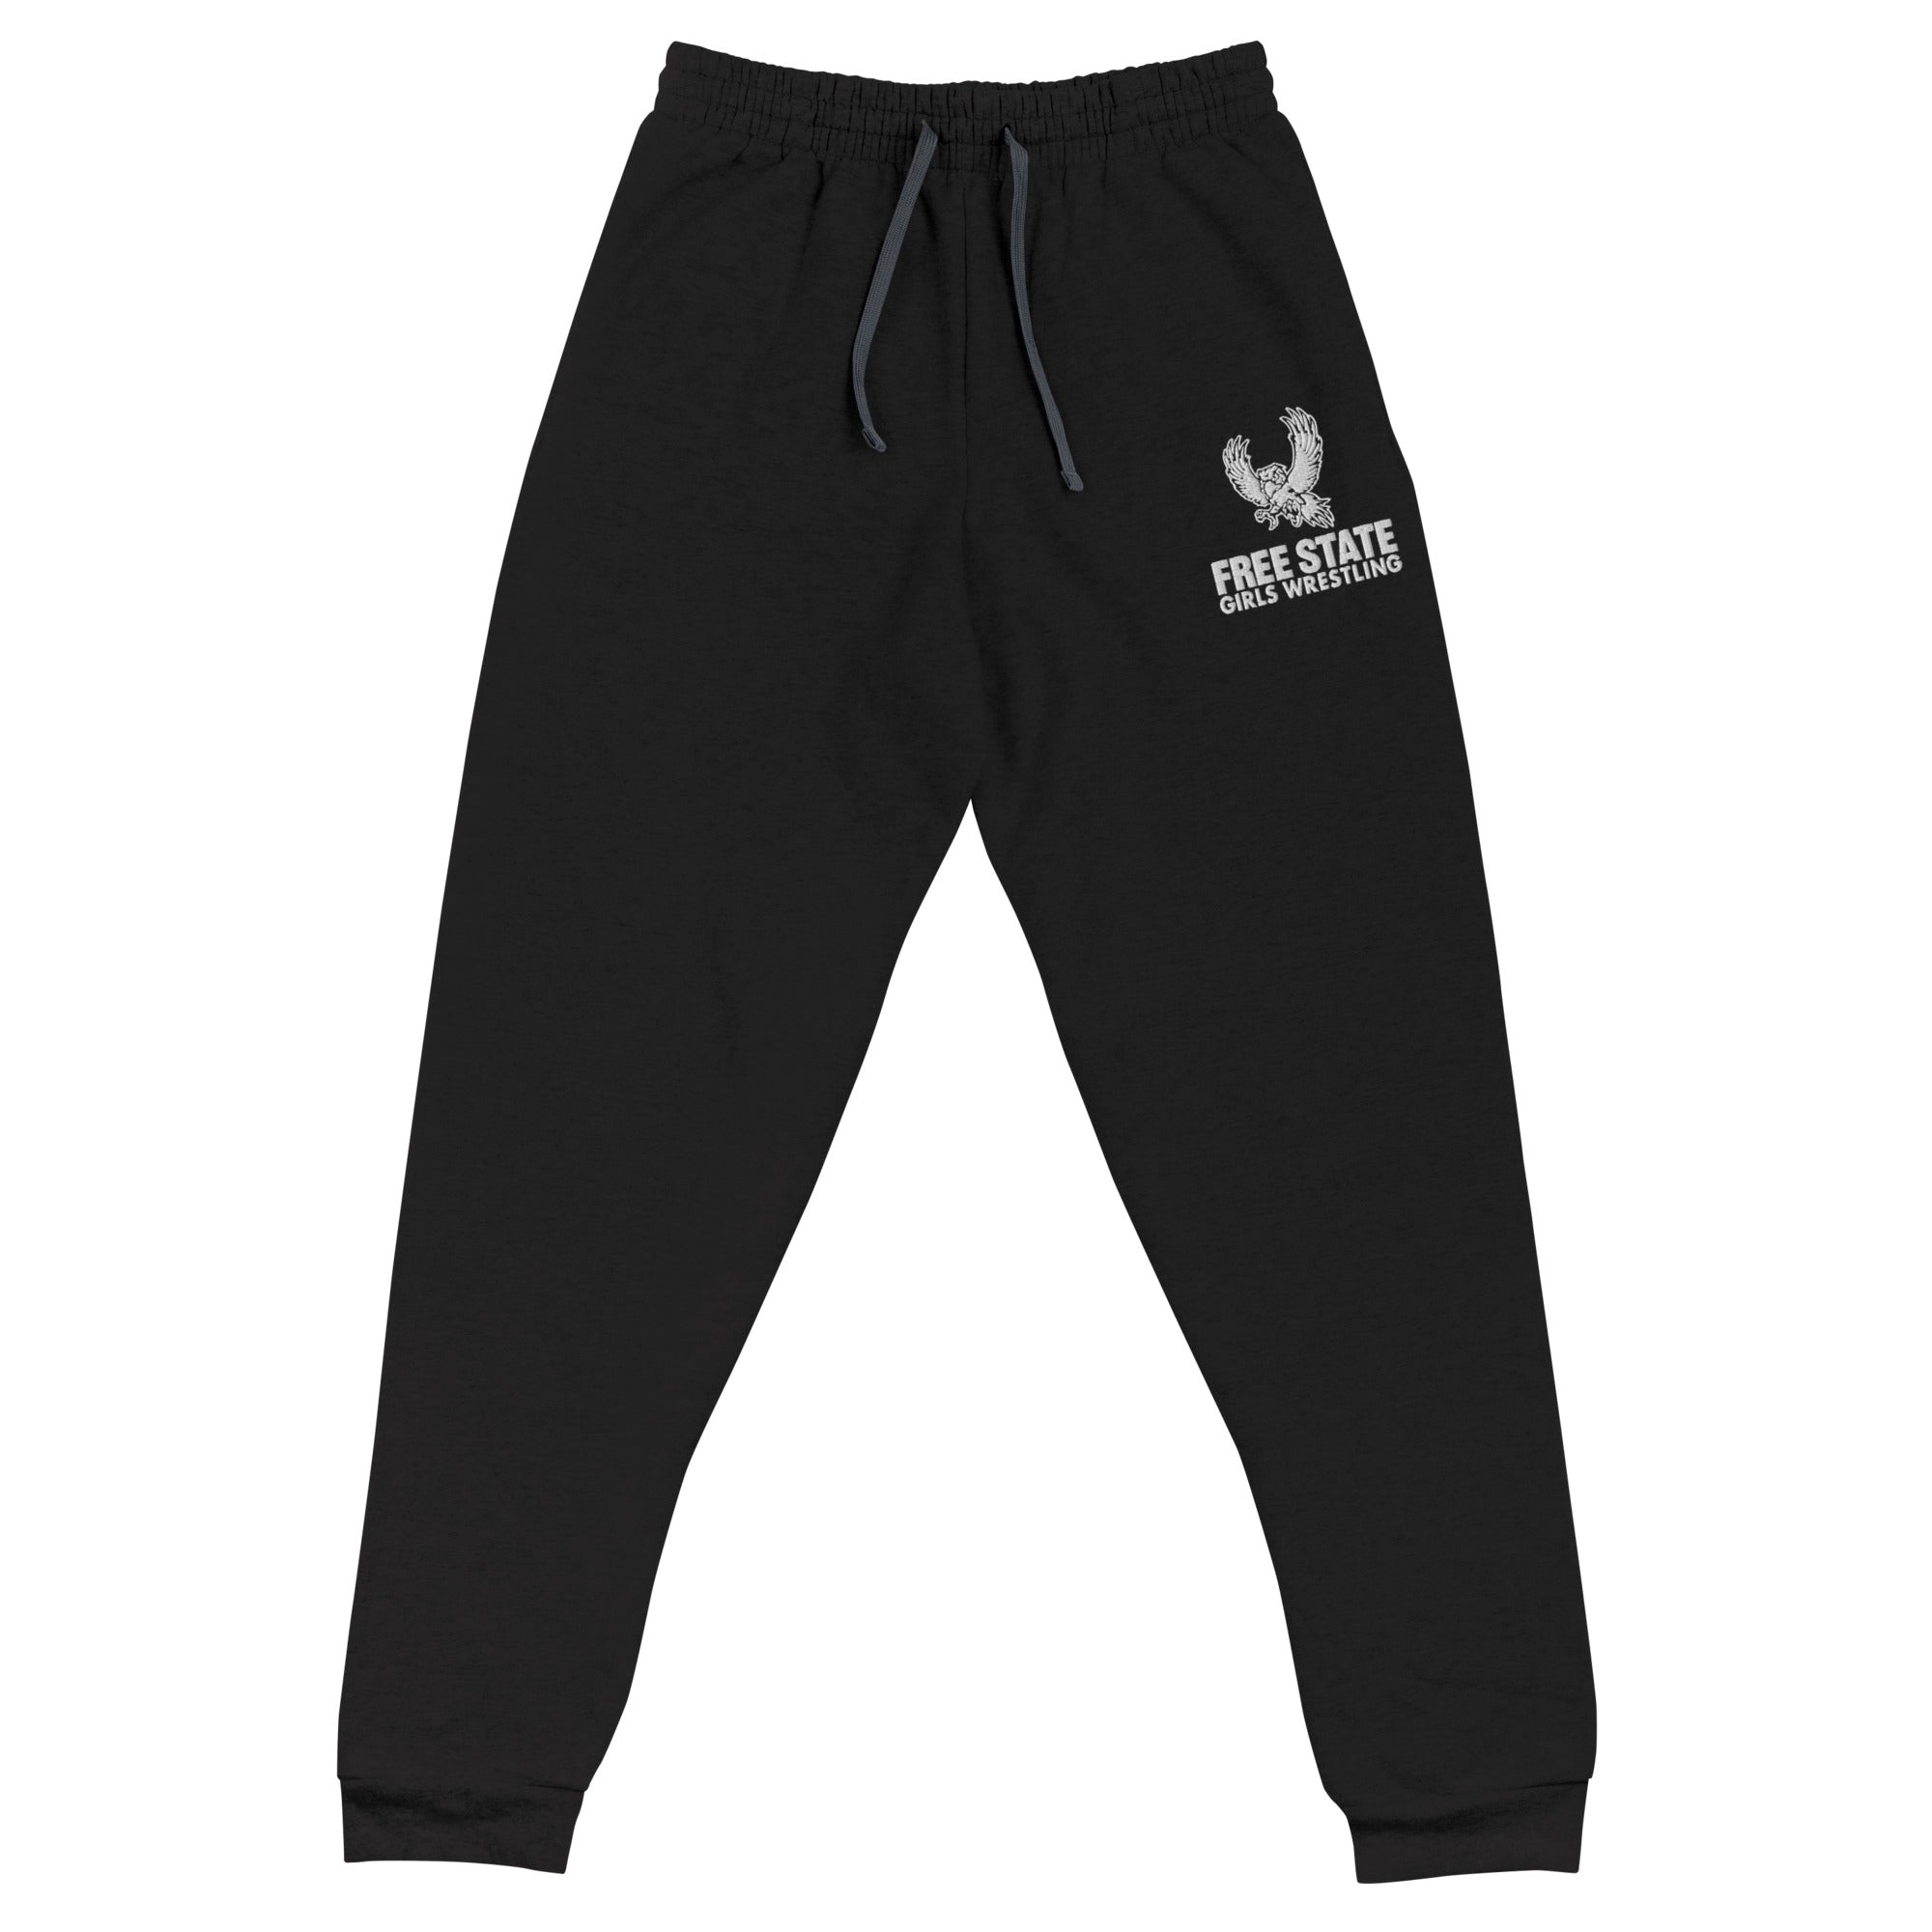 Lawrence Free State Girls Wrestling  Unisex Joggers